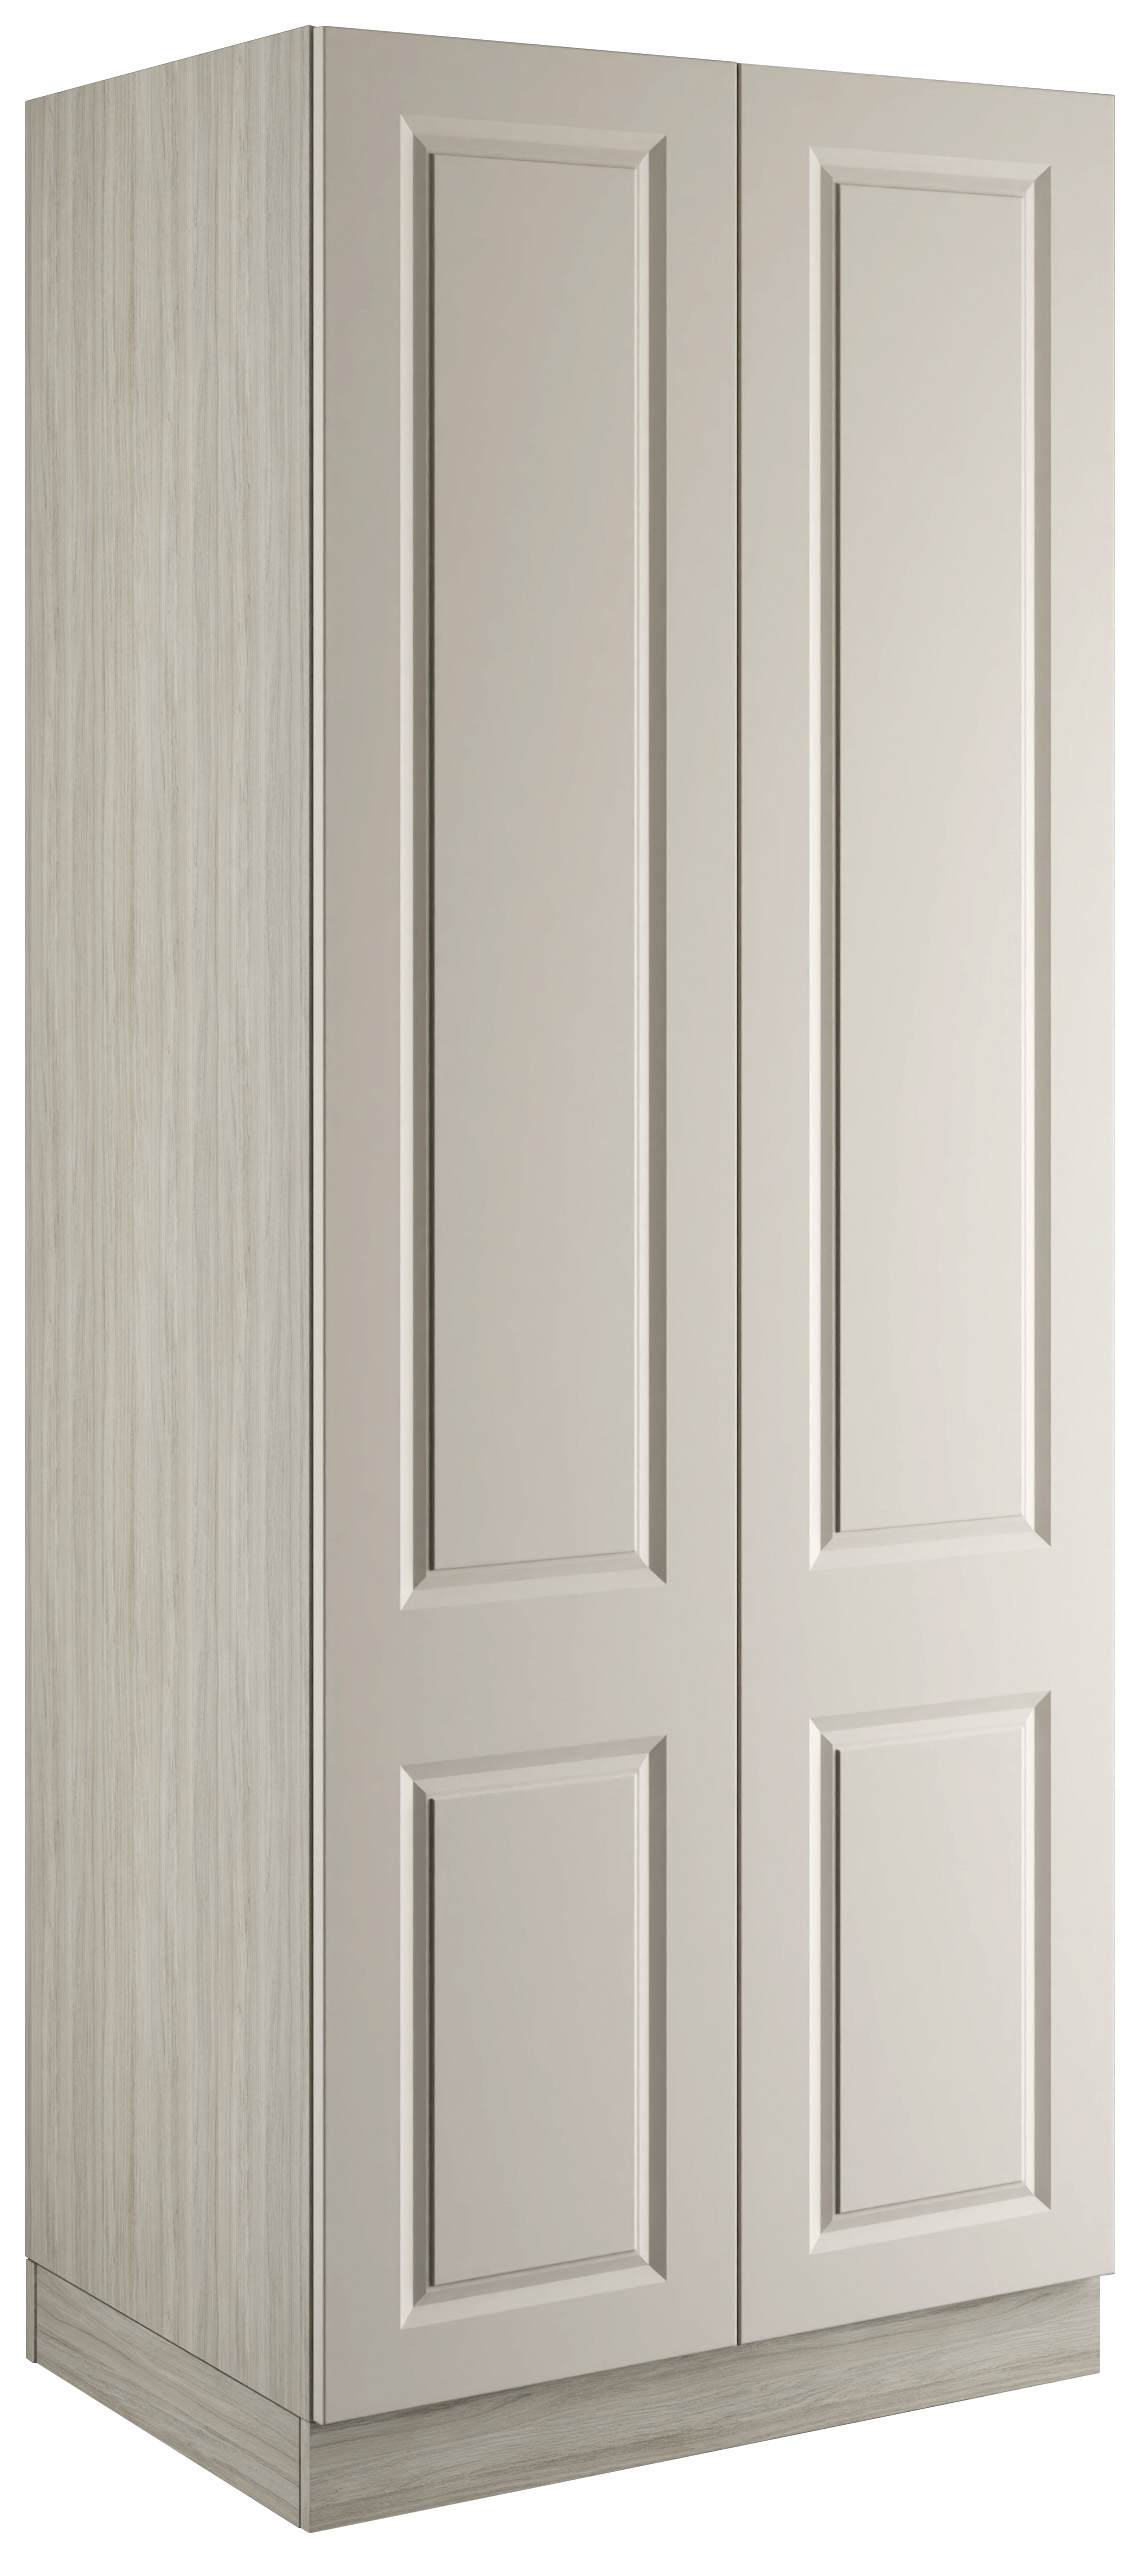 Harrogate Taupe Grey Double Wardrobe with Shelves - 900 x 2260 x 608mm